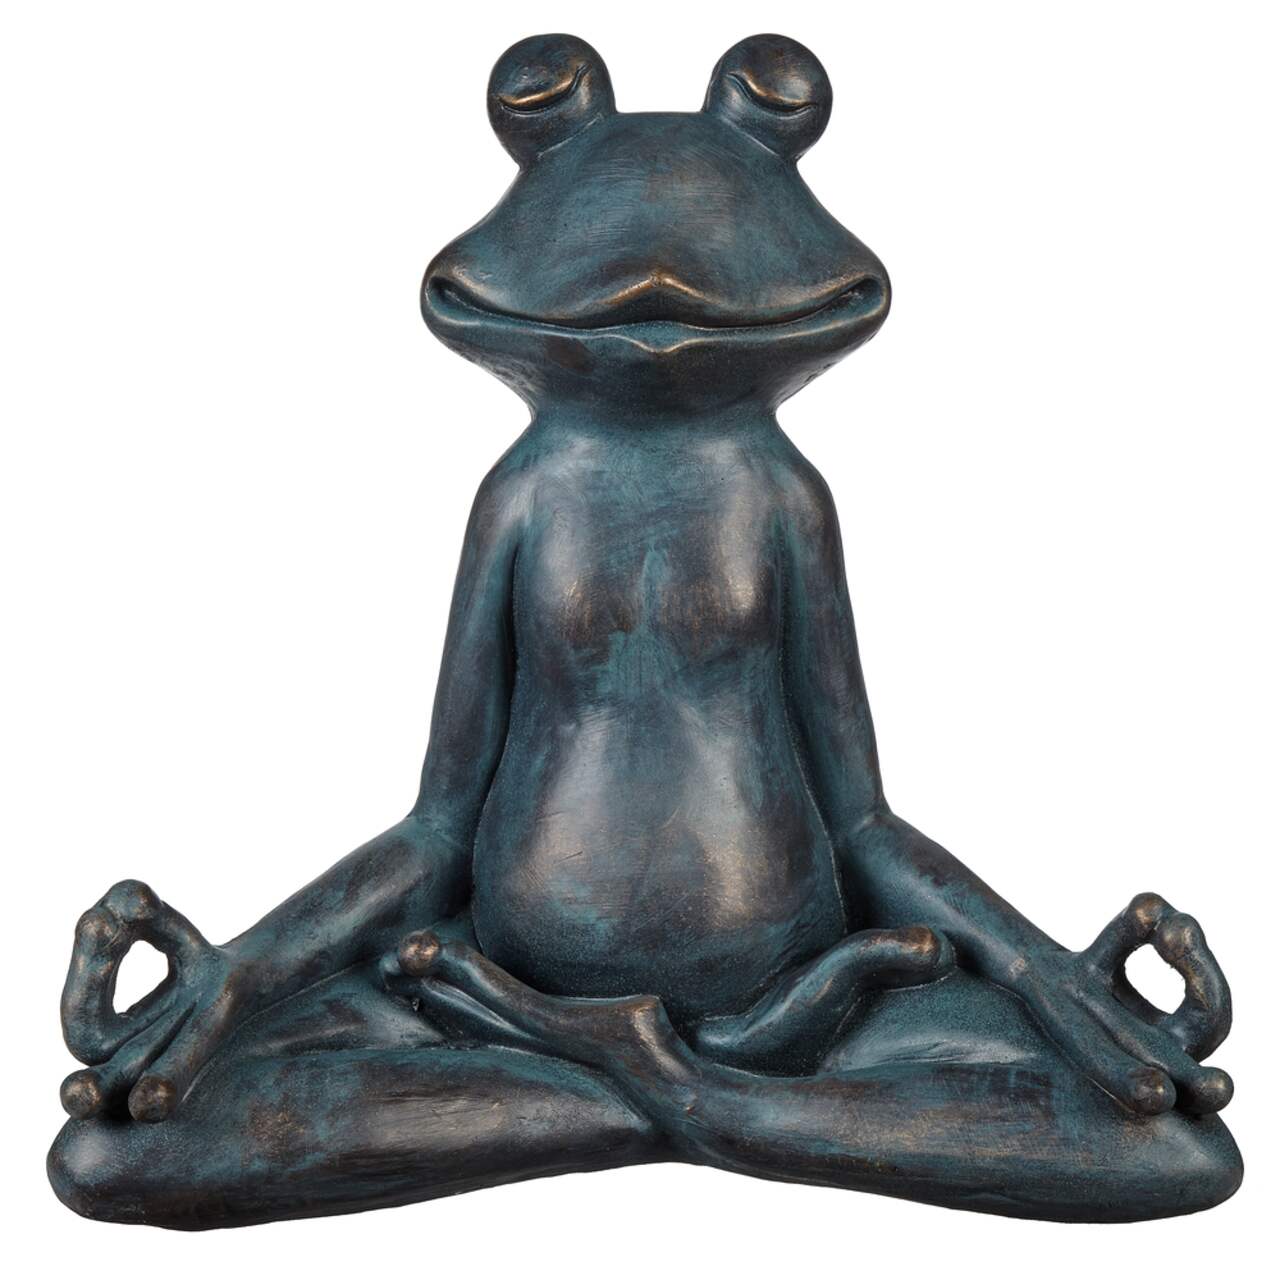 https://media-www.canadiantire.ca/product/seasonal-gardening/backyard-living/outdoor-living-accessories/0597312/for-living-yoga-frog-assorted-5e88b79d-572a-42f4-b440-eb8e5491064a.png?imdensity=1&imwidth=640&impolicy=mZoom